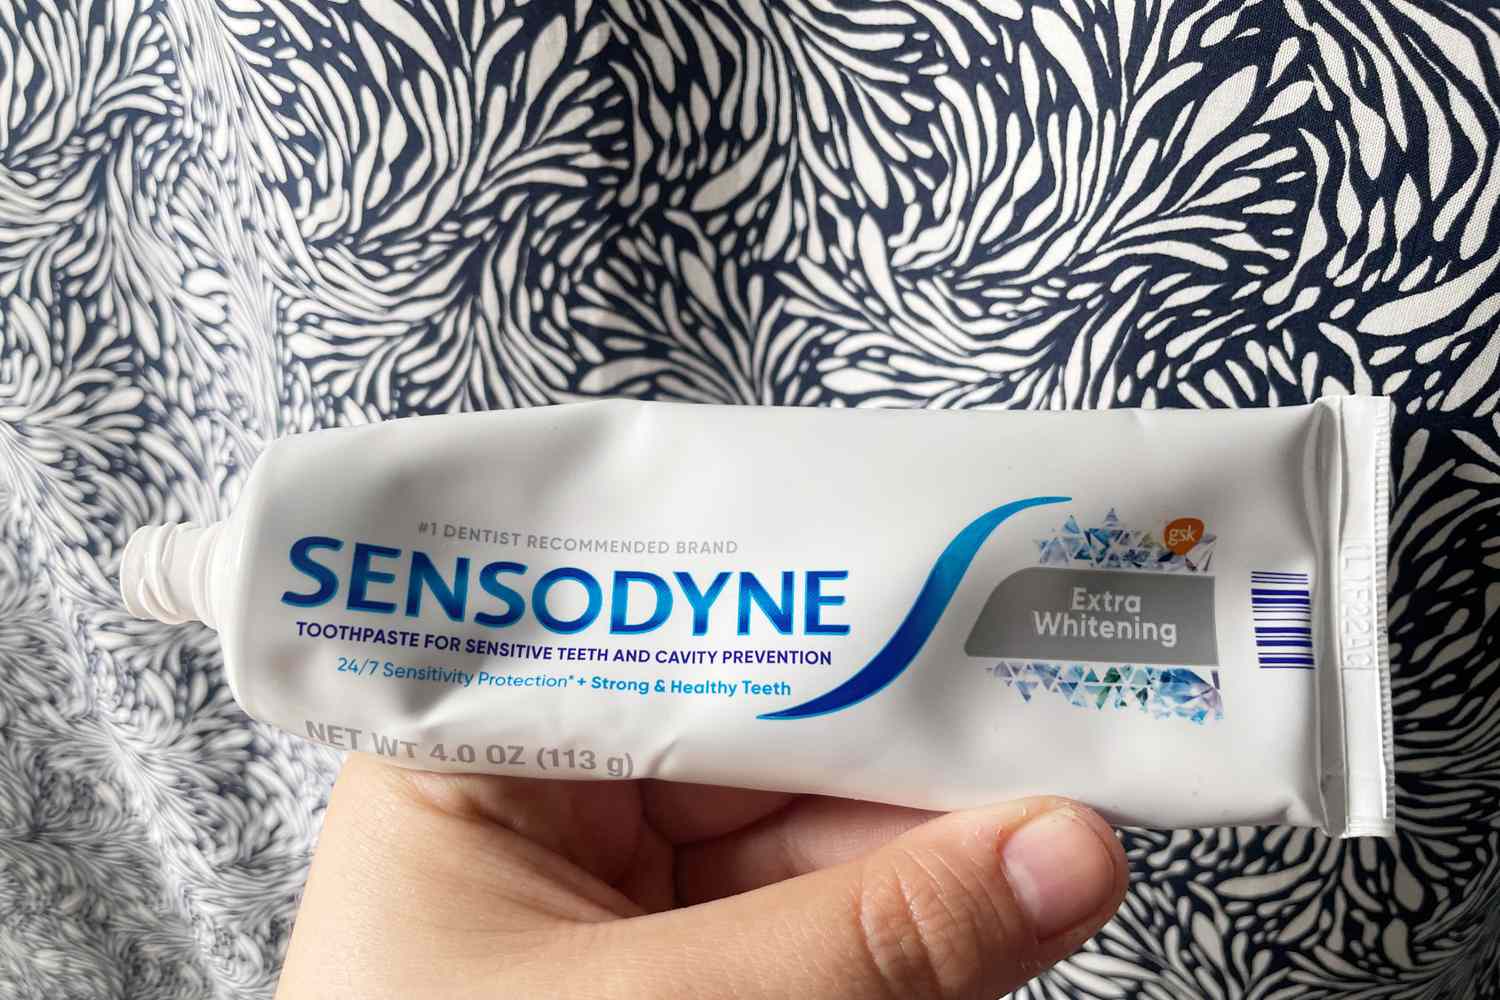 A hand holding a tube of Sensodyne Extra Whitening Toothpaste